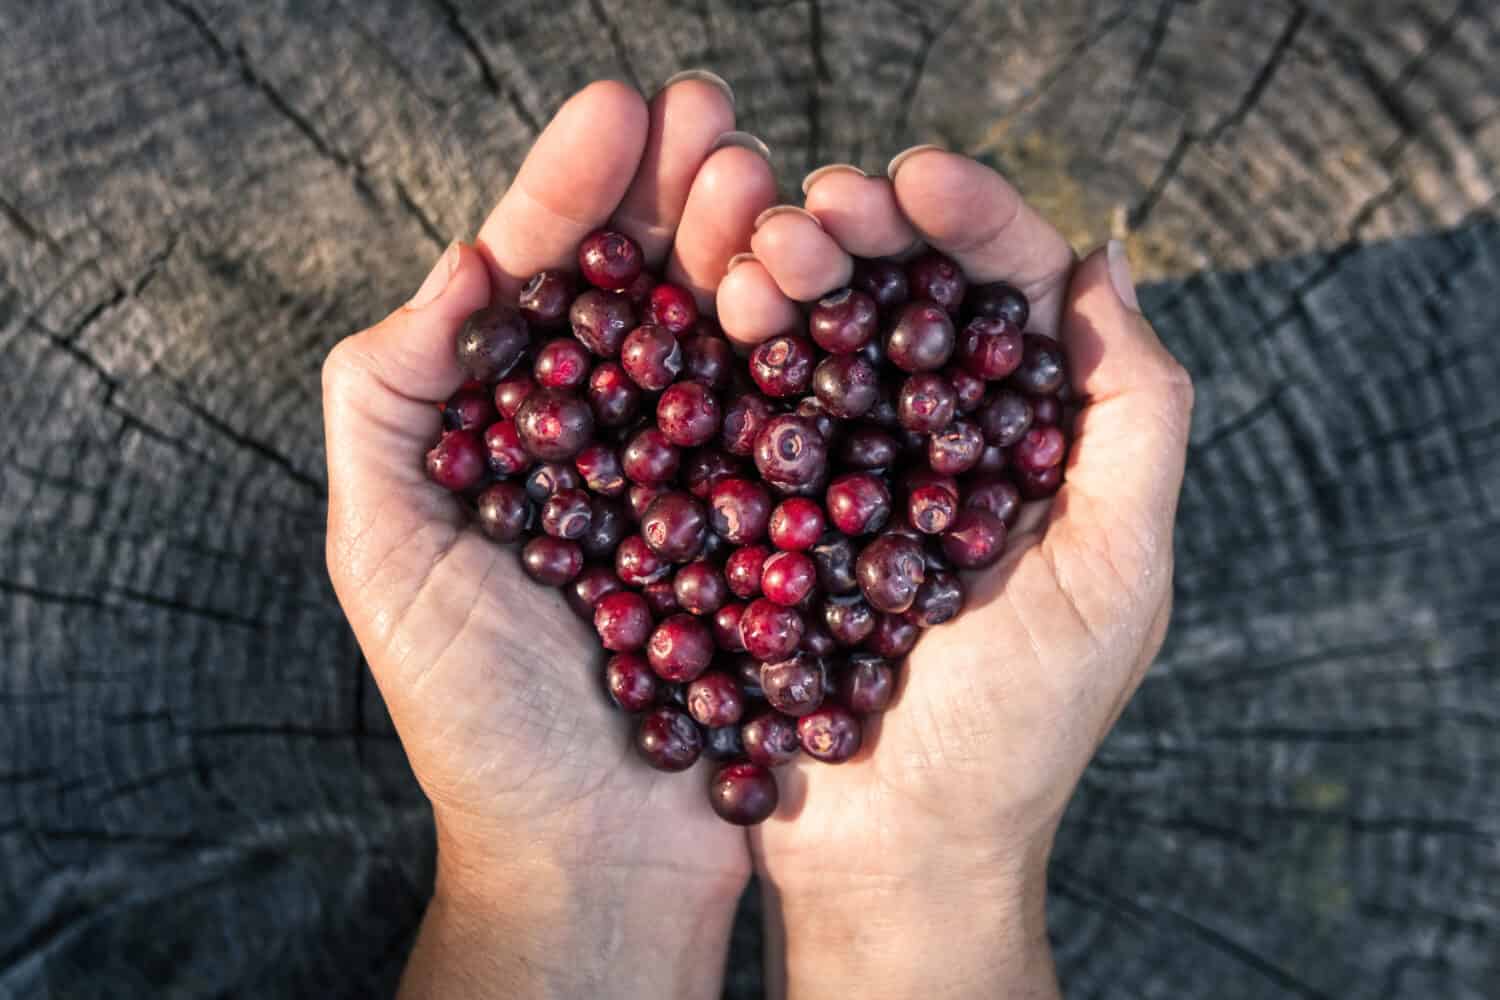 close up of a woman'ss hands holding a bunch of fresh ripe huckleberries in the shape of a heart over a rustic wooden background